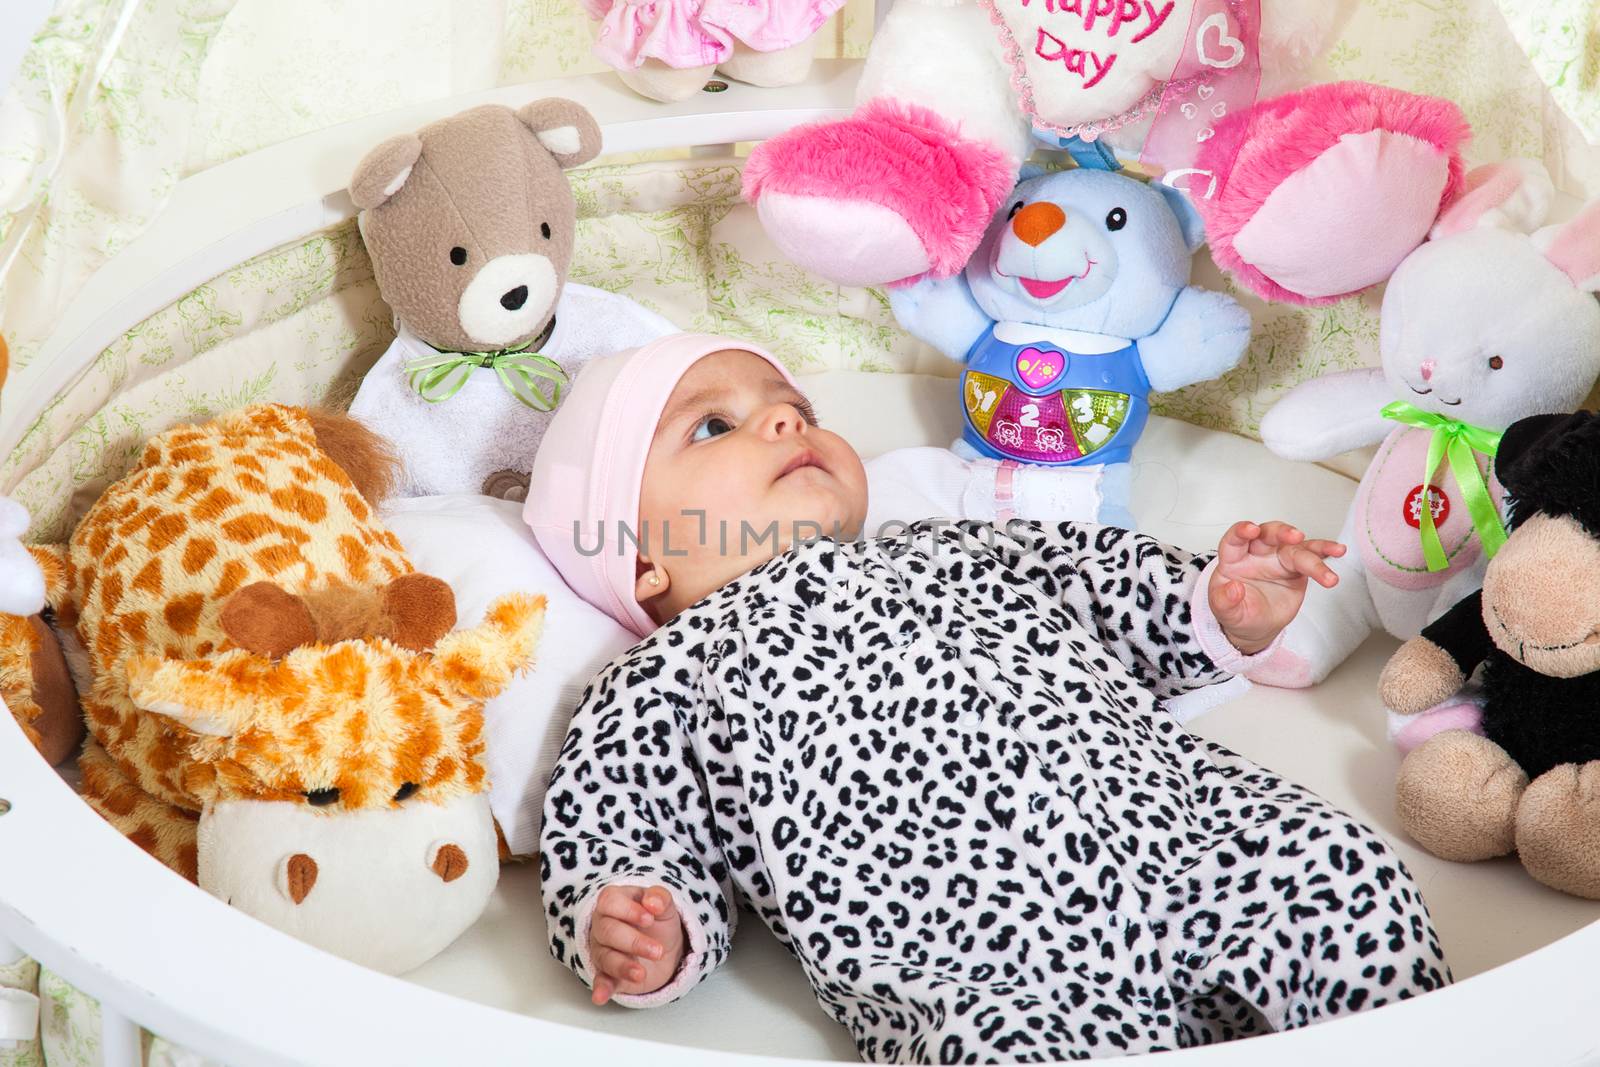 A baby girl dressed in animal print surrounded by stuffed animals